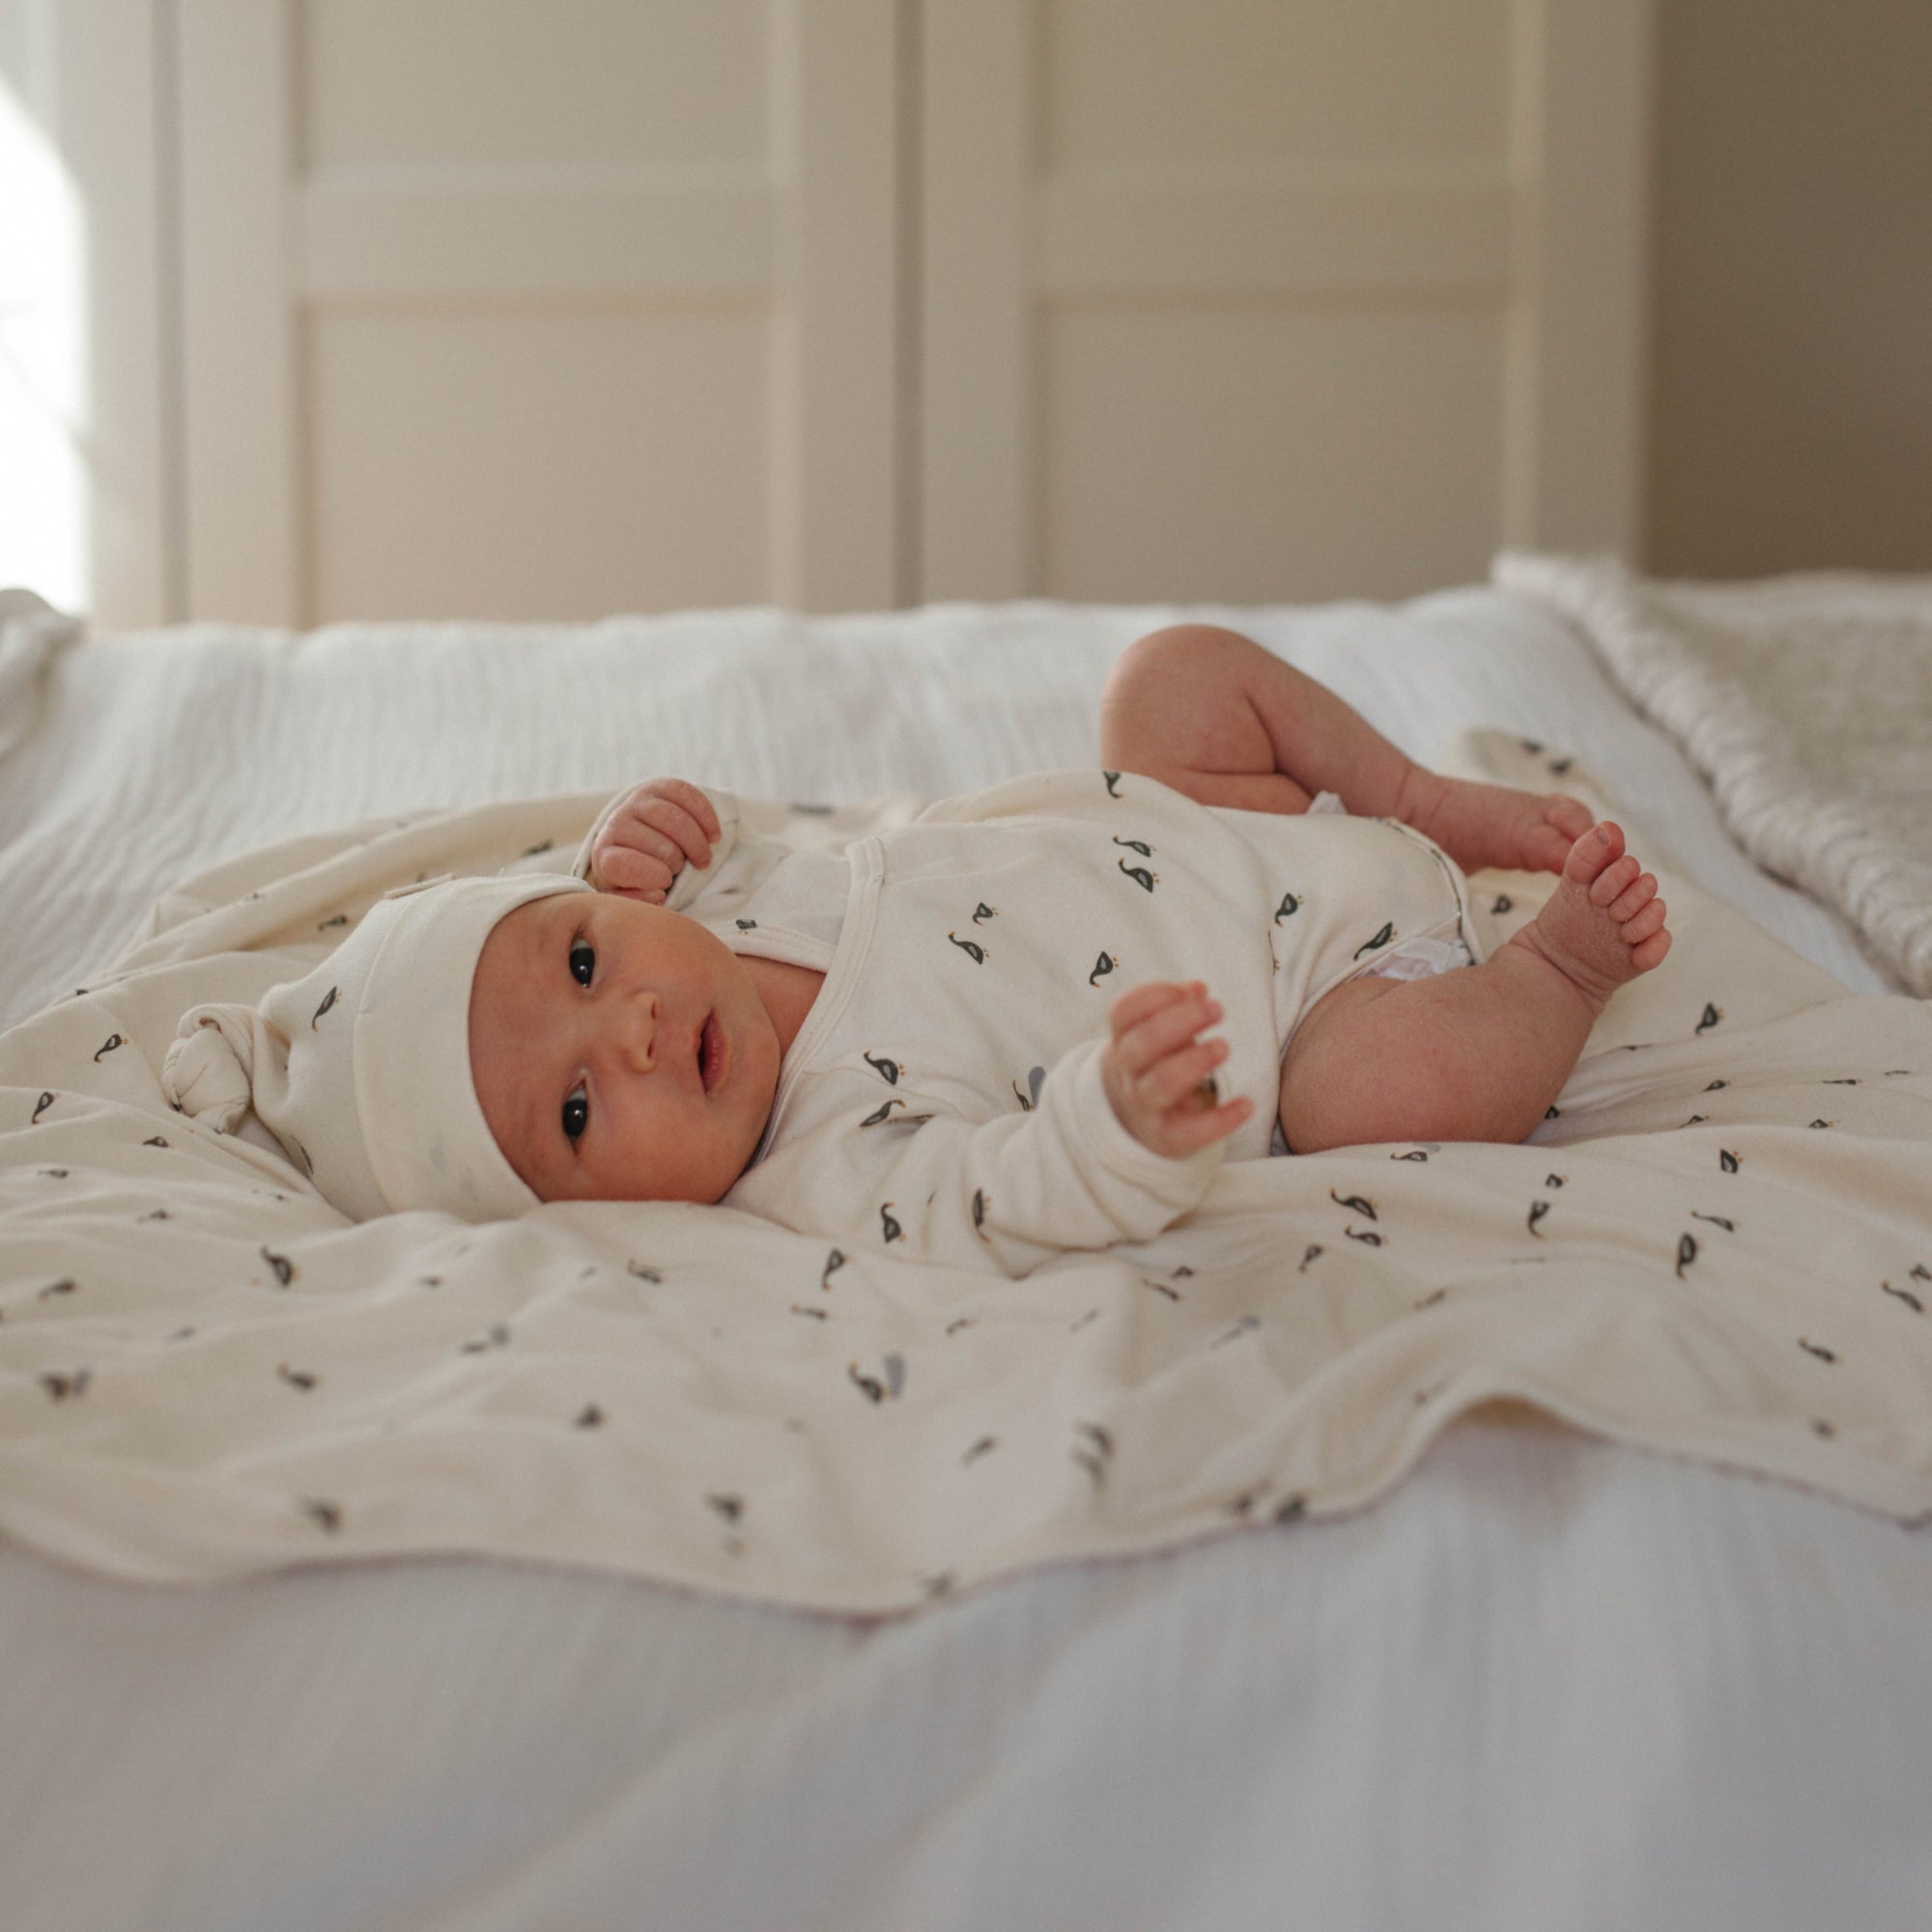 A newborn lying down on an organic cotton baby blanket from Oolie, and looking at the camera. The baby is wearing an organic cotton hat and bodysuit. The hat, bodysuit, and blanket all have a repeating printed pattern of small ducks.